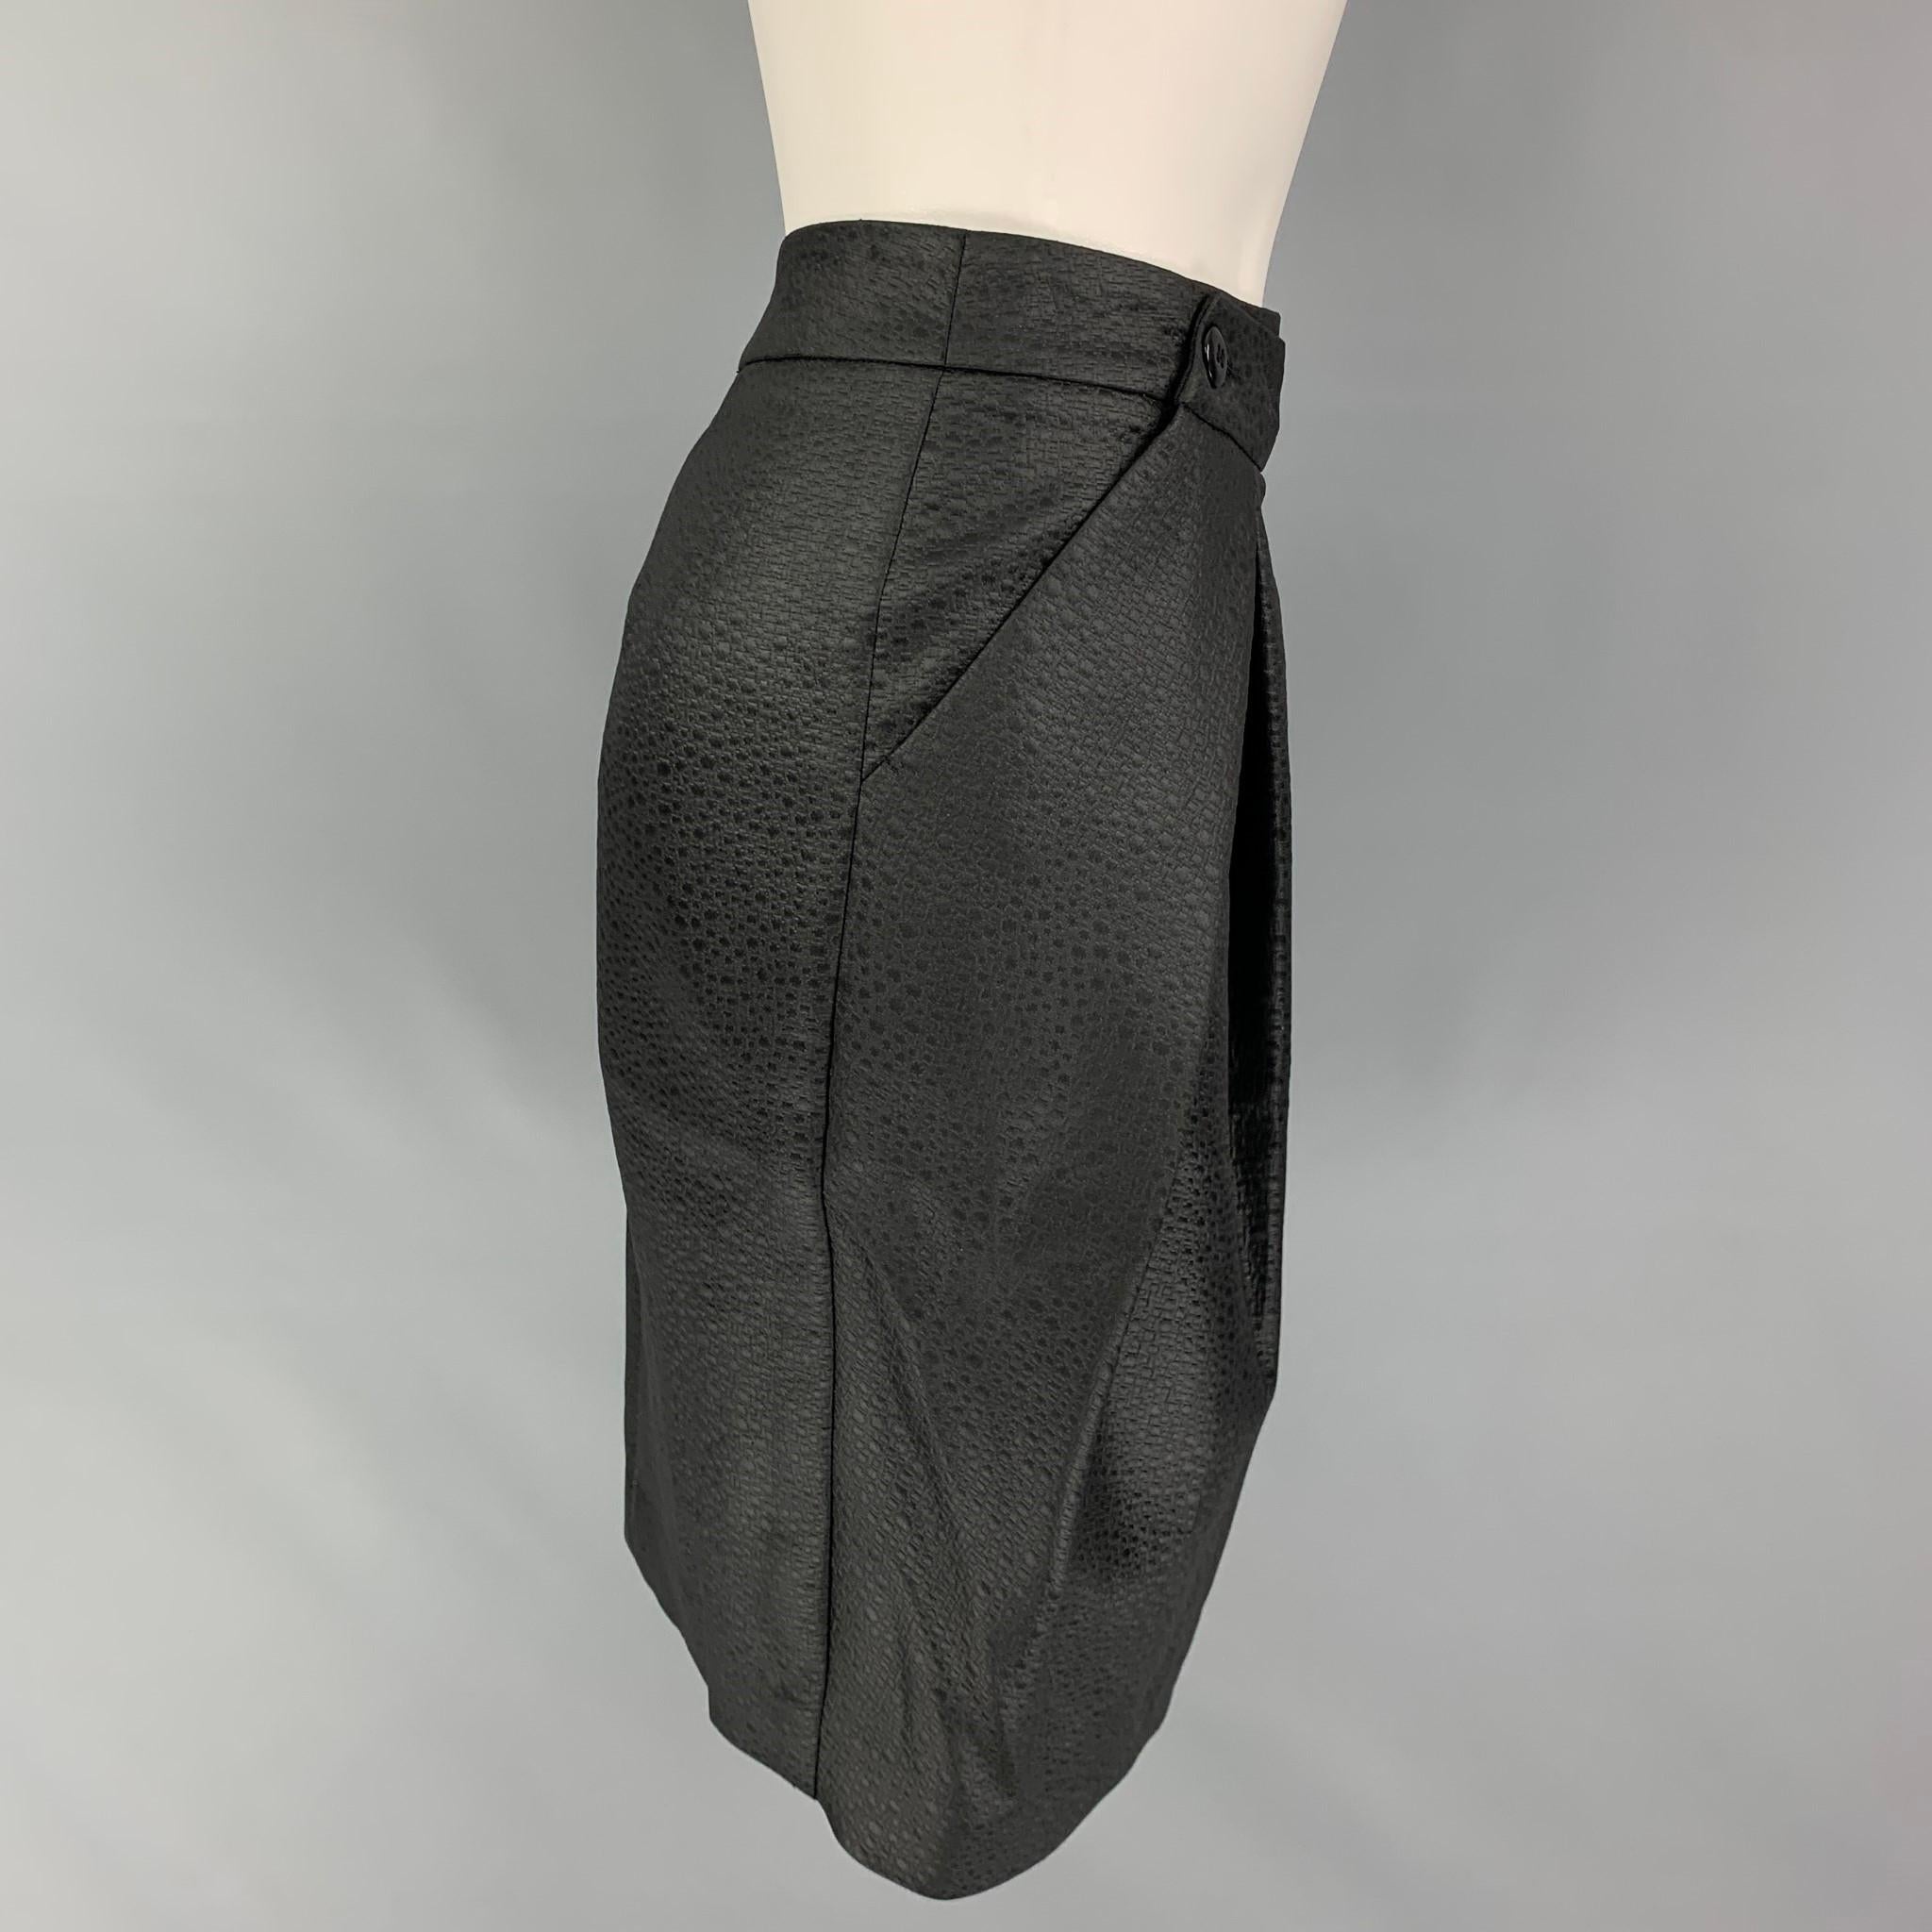 ARMANI COLLEZIONI skirt comes in a black embossed acetate blend featuring a pleated style, slit pockets, and a buttoned closure. Made in Italy.

New with tags. 
Marked: 4

Measurements:

Waist: 28 in.
Hip: 33 in.
Length: 21 in. 